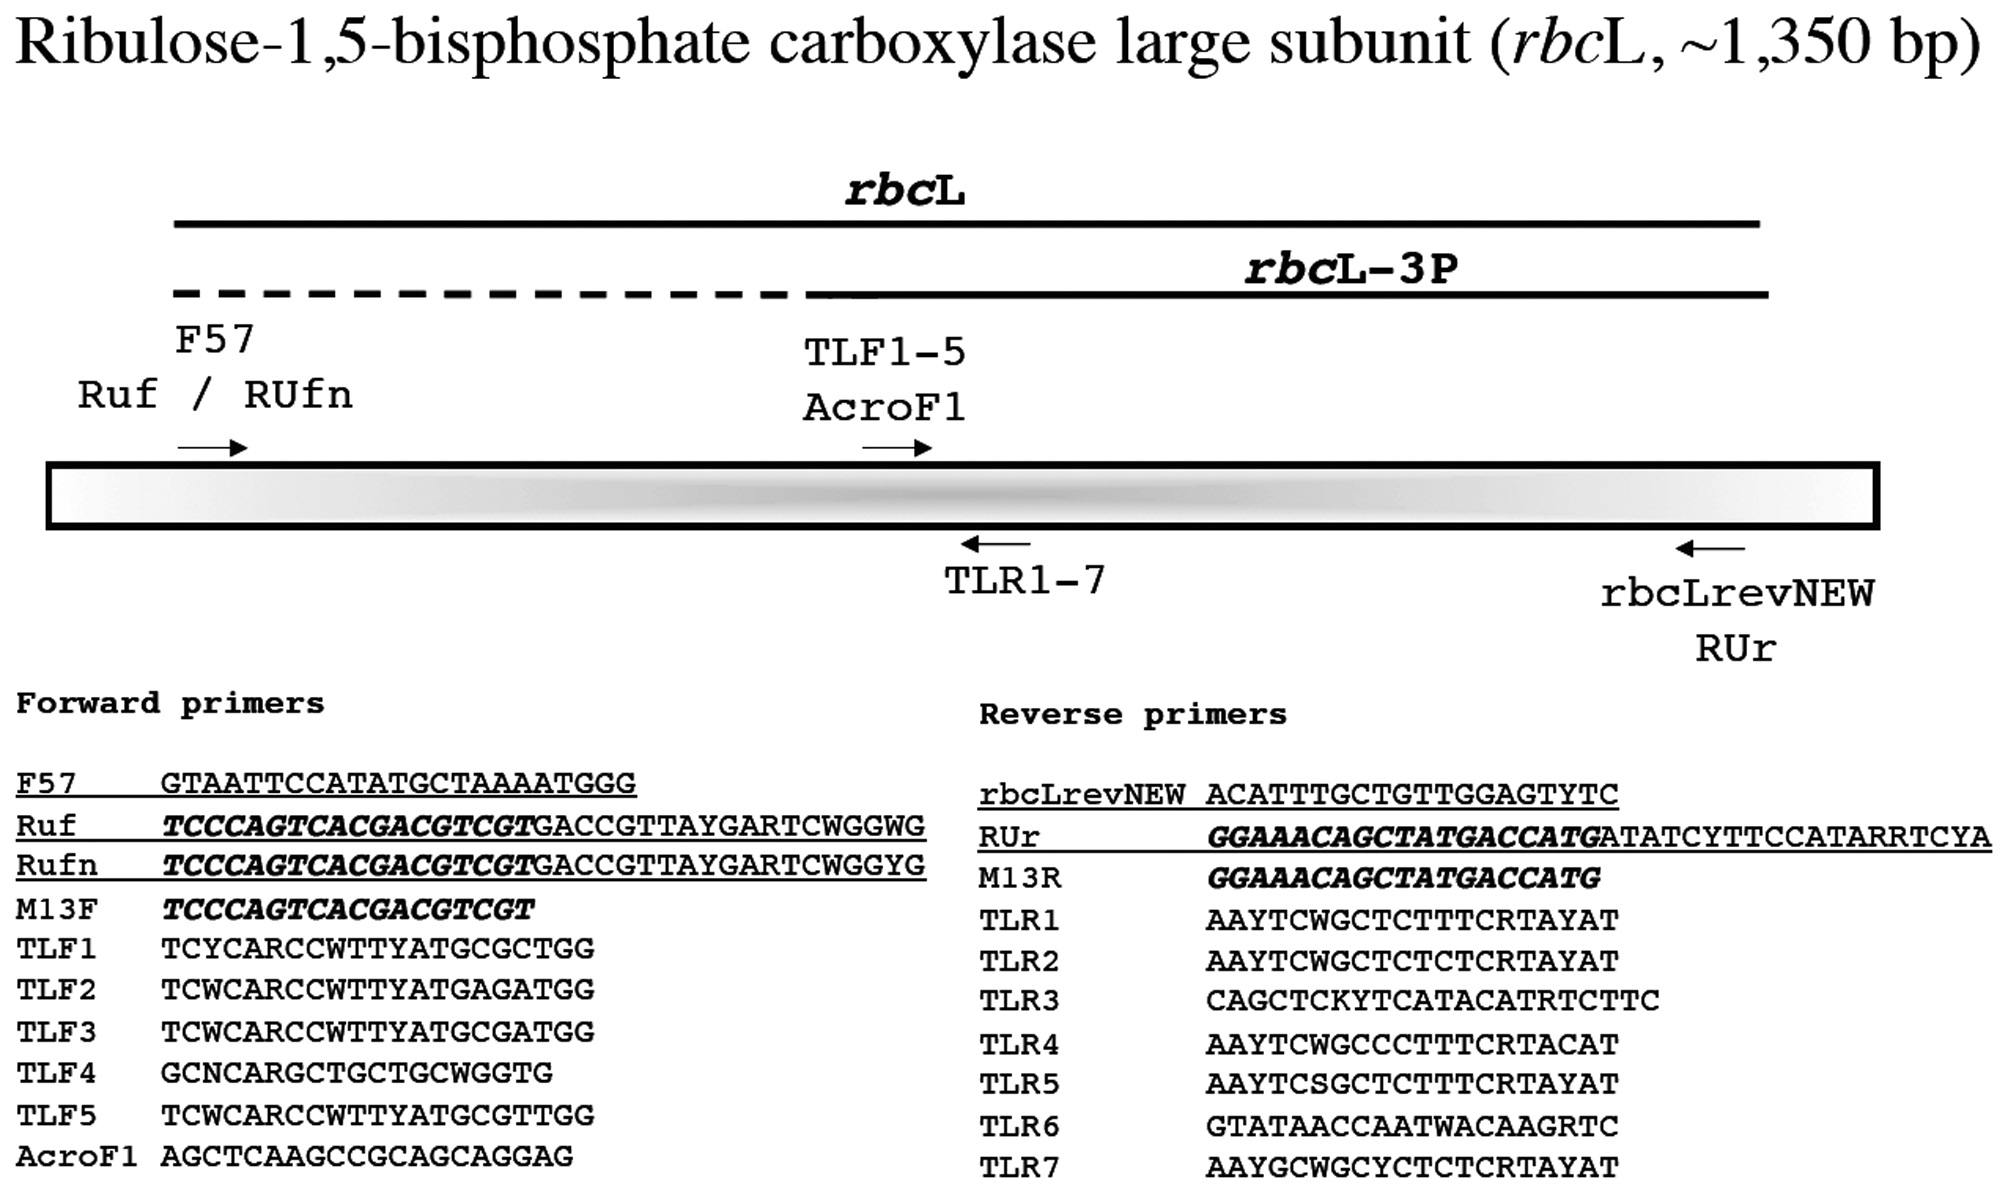 Overview of PCR / sequencing strategy for the plastid rbcL. For the DNA barcode region rbcL-3P the dashed line indicates that we
amplify the entire fragment, but use sequence from the external 3′ PCR primer (rbcLrevNEW) to identify the best internal forward primer (TLF1-5,
ACROF1) to generate a full bidirectional read for only the 3′ end of this gene (solid line).